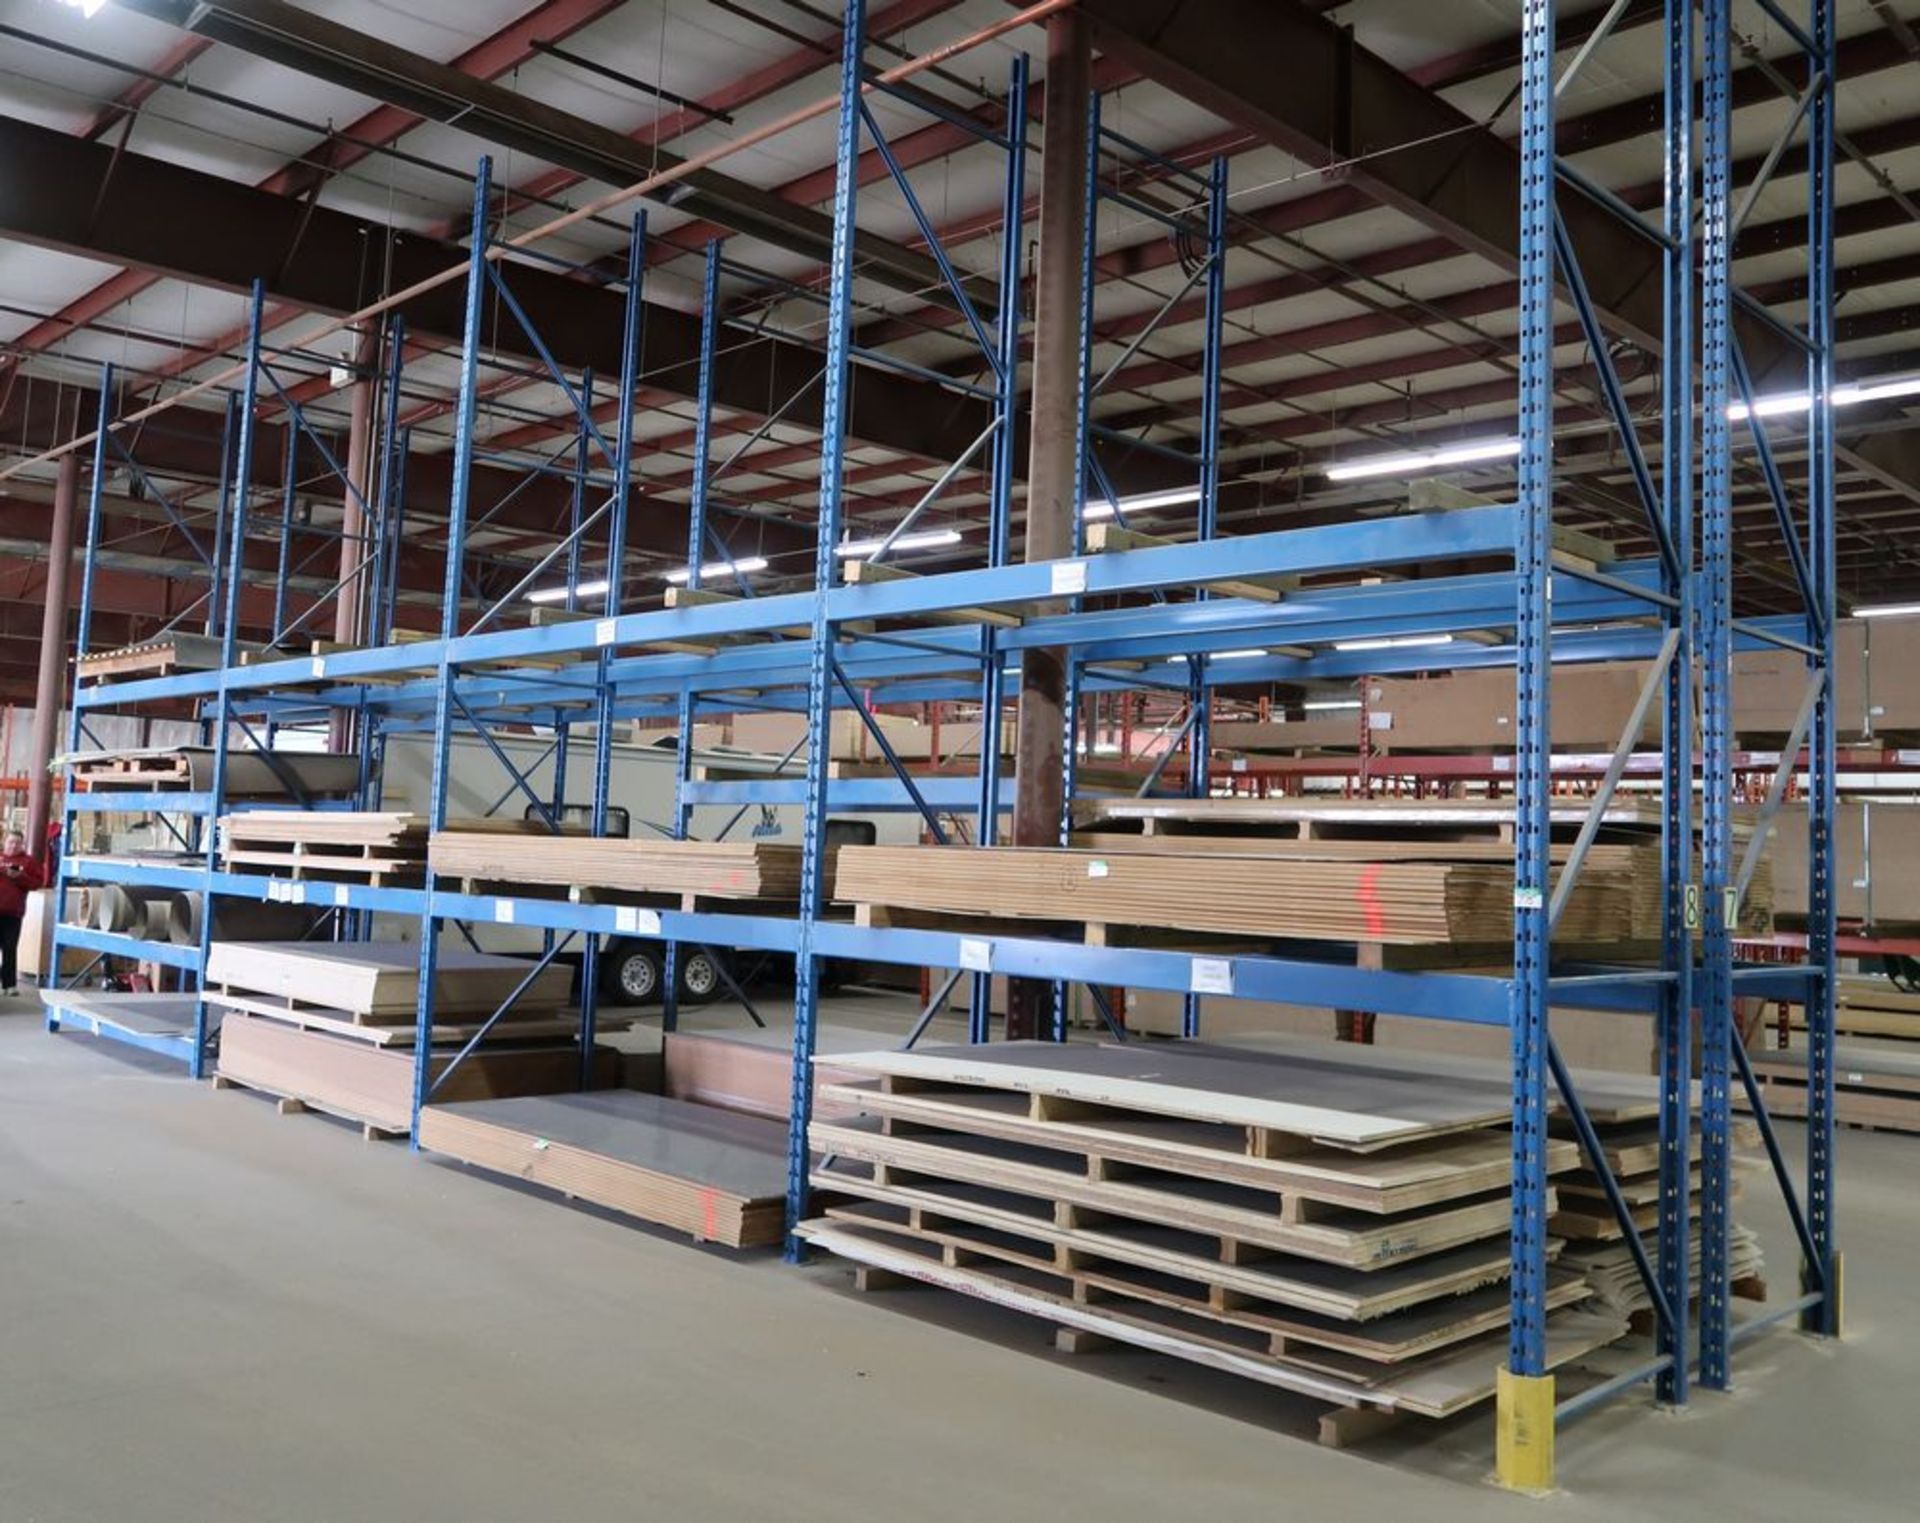 4 SECTIONS OF 18' HIGH PALLET RACKING, 10' SECTIONS